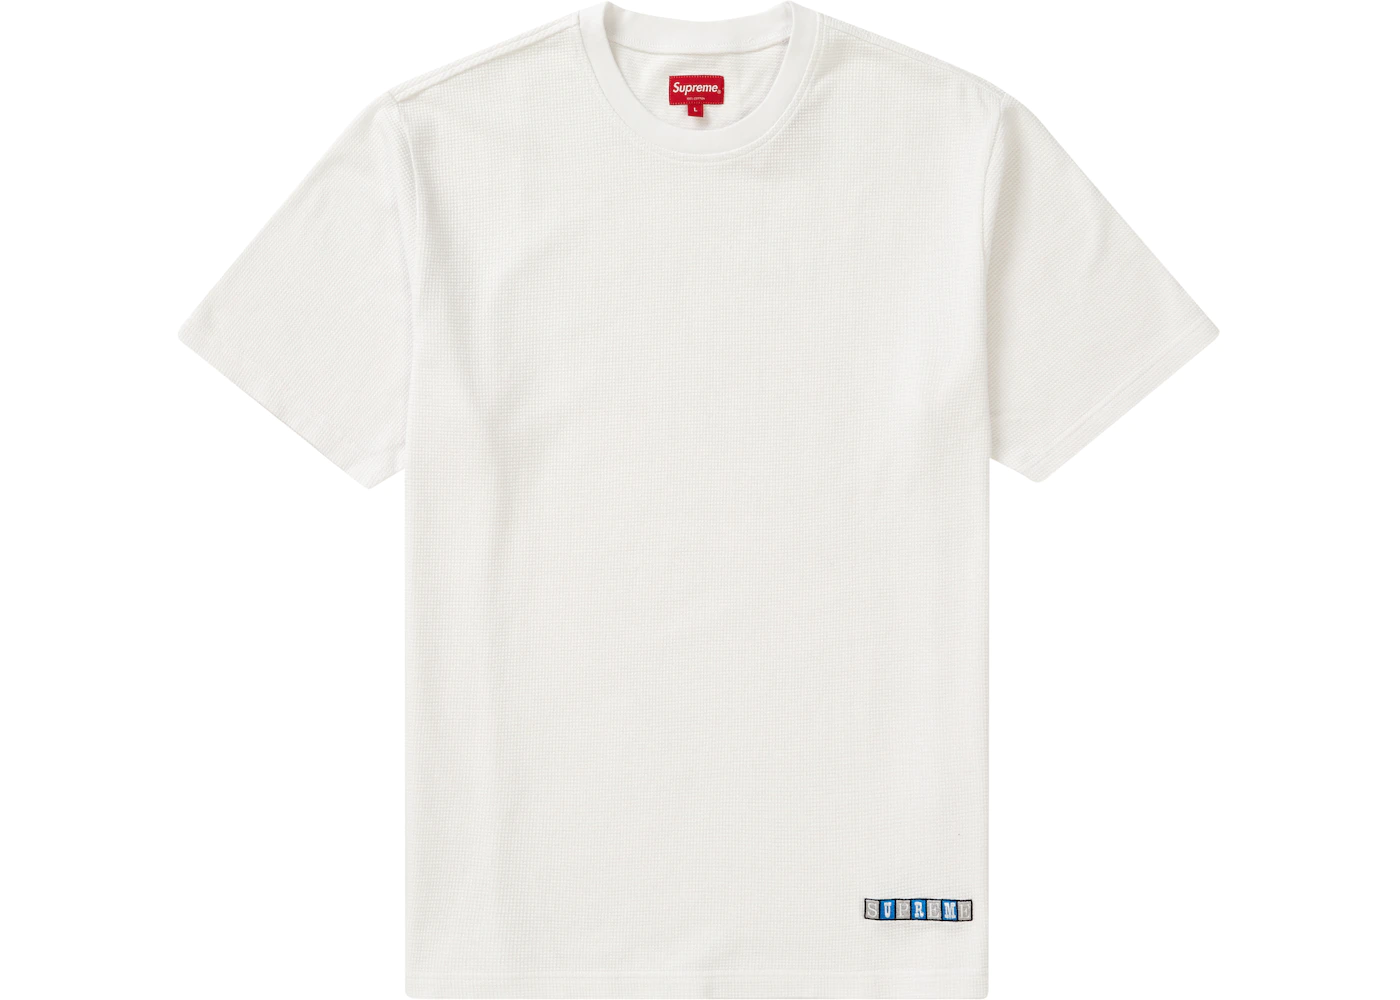 Supreme Waffle S/S Top White Men's - SS19 - US